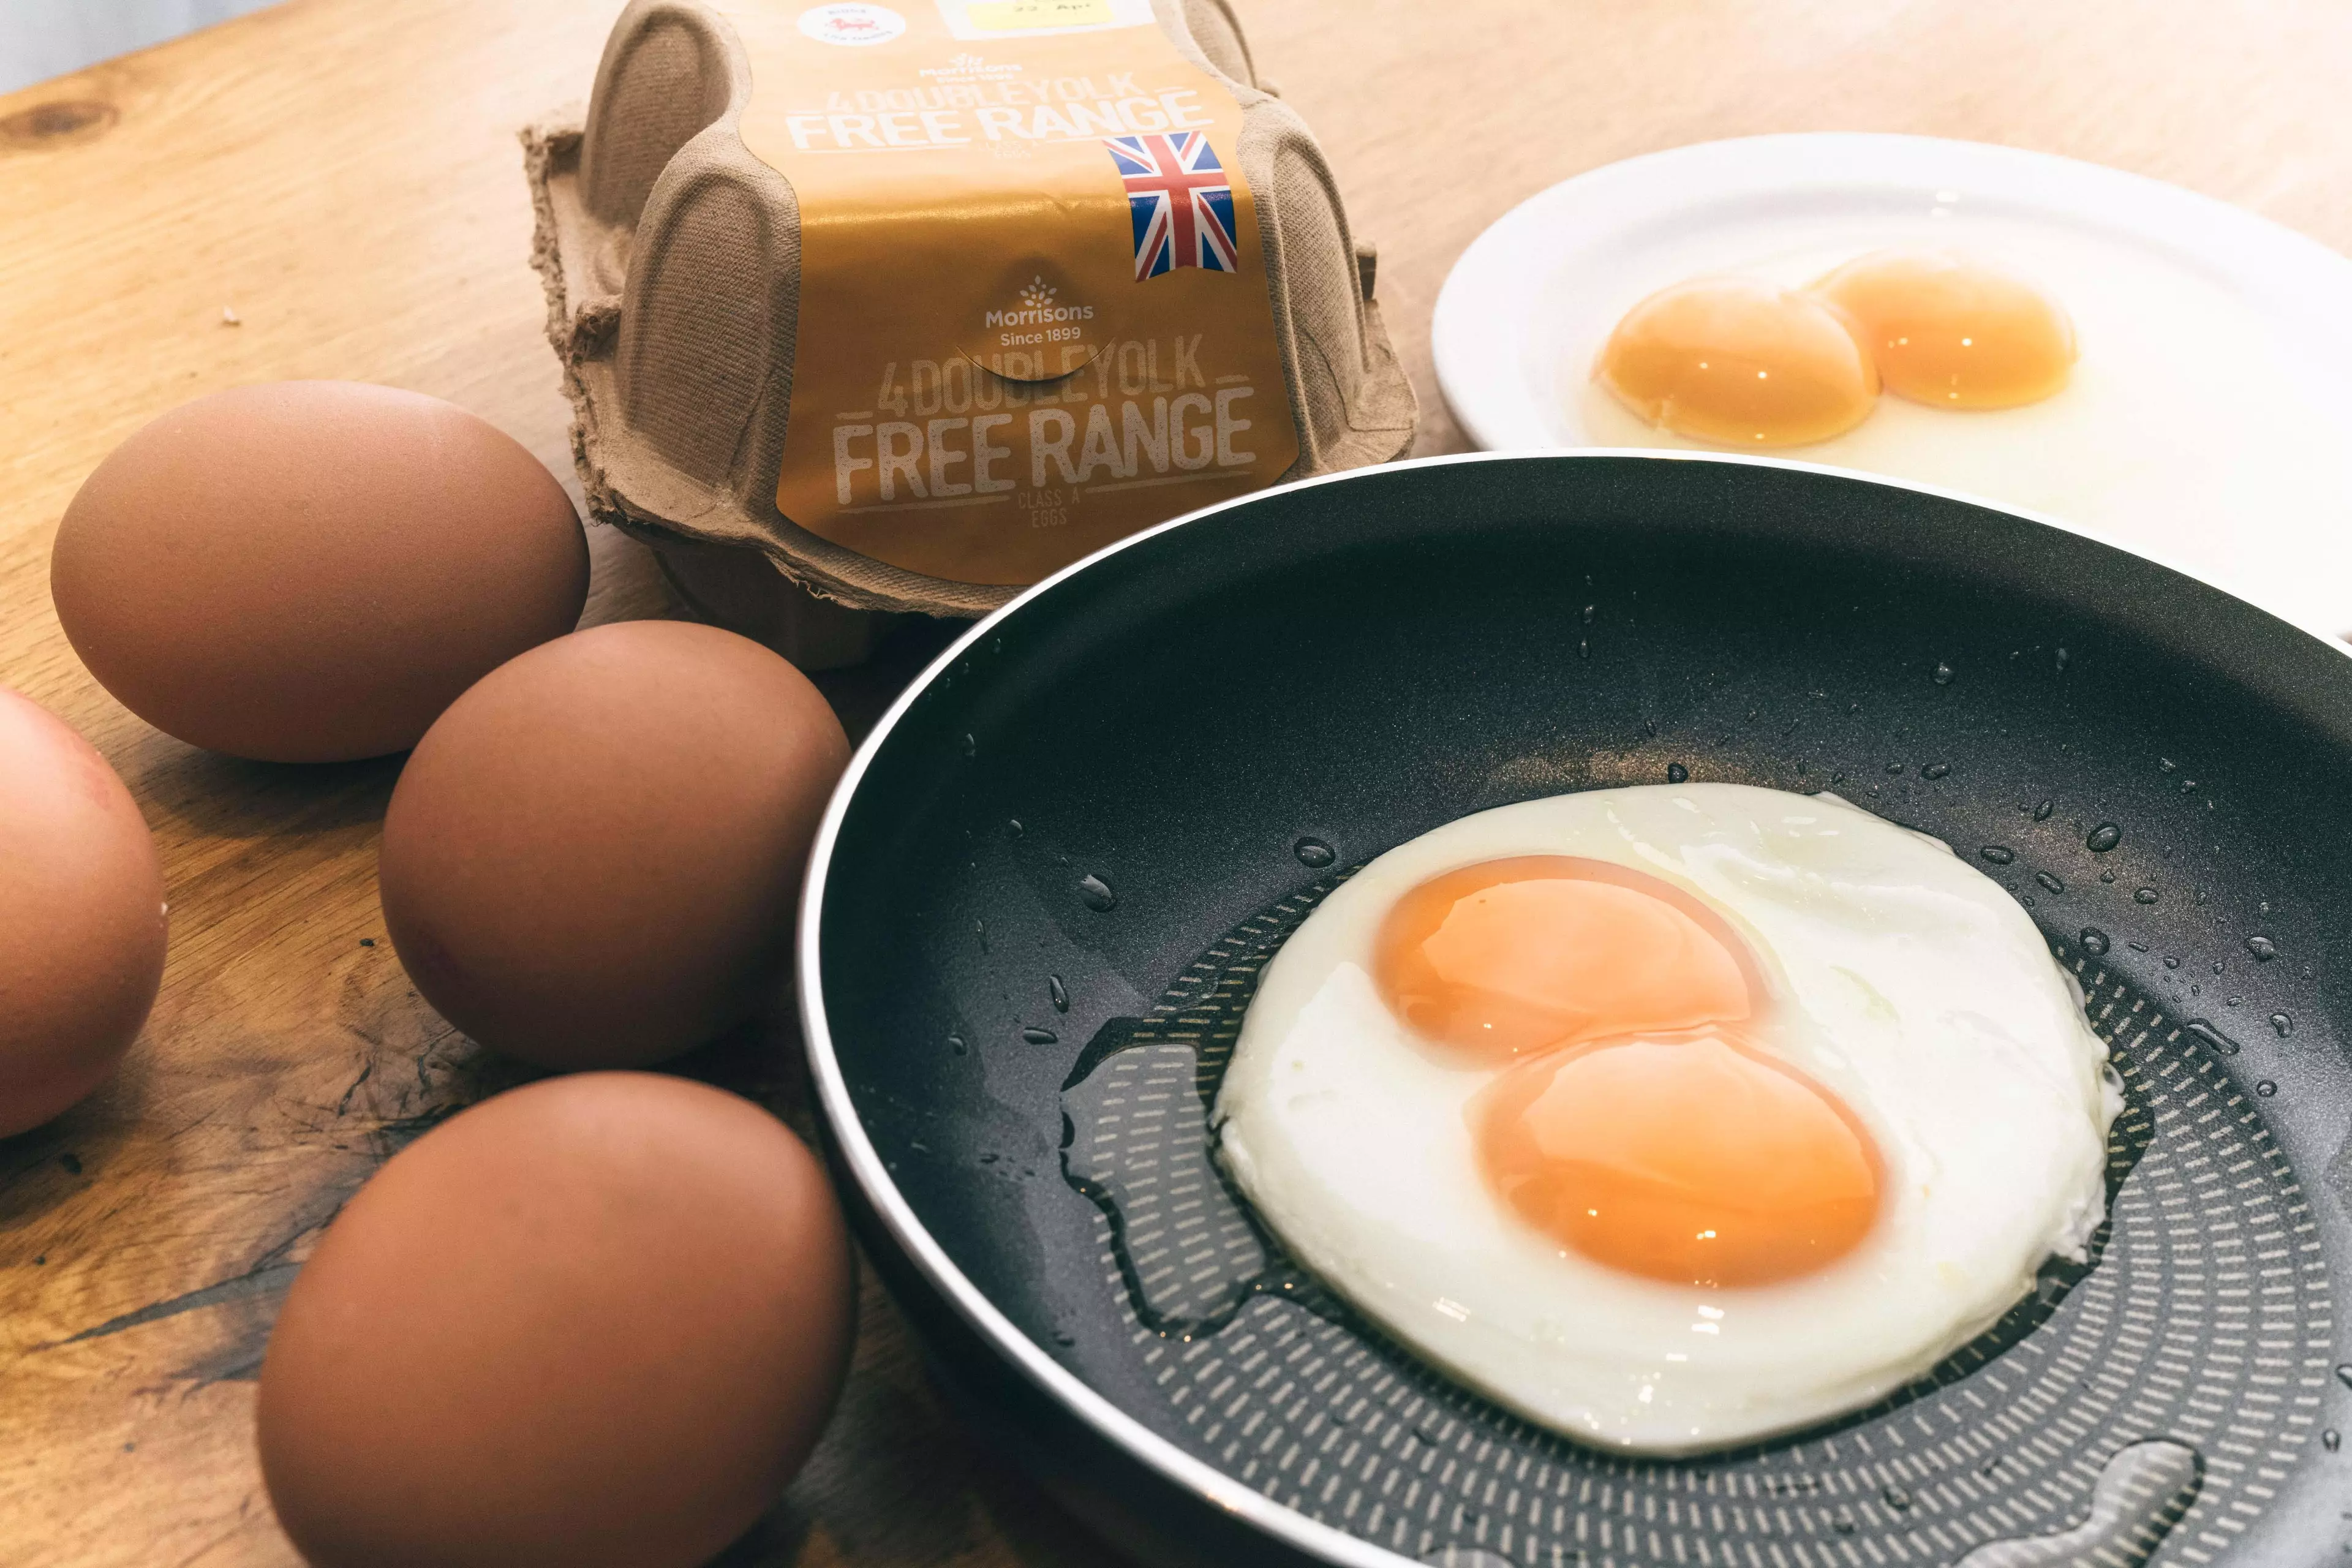 Double yolked eggs for breakfast, anyone?